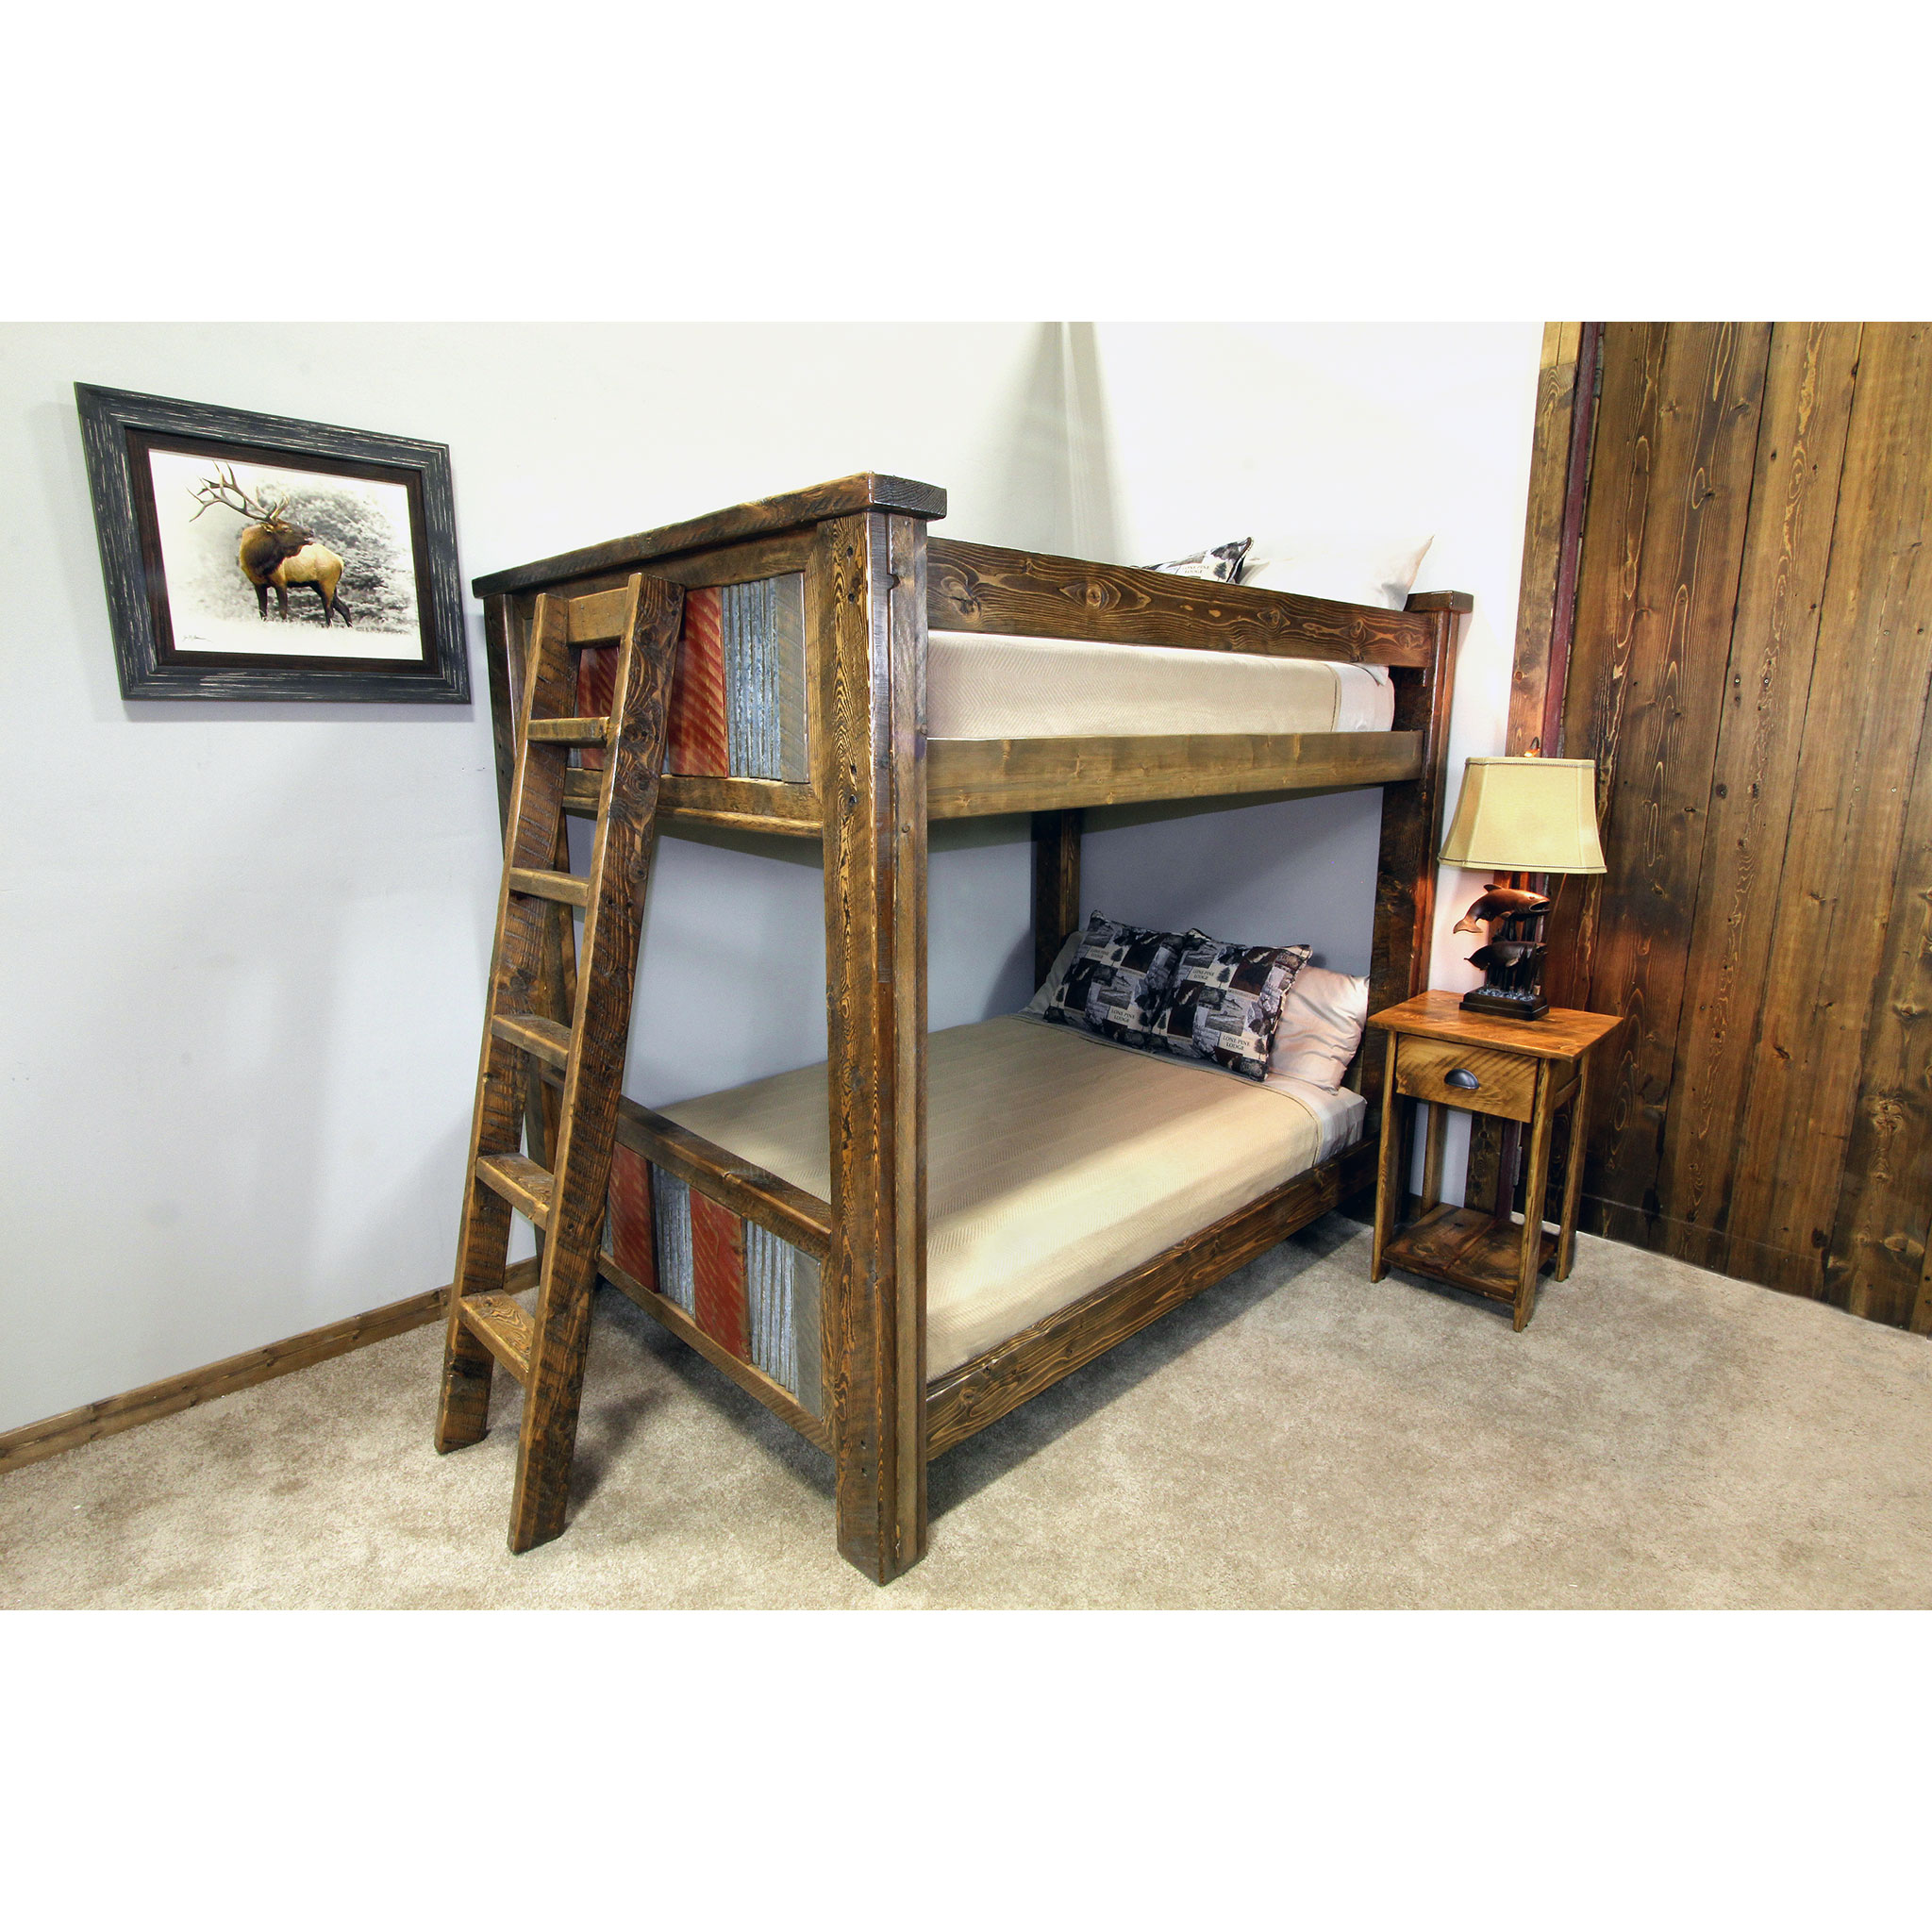 Rustic Metal And Wood Bunk Bed Four, Metal And Wood Bunk Beds